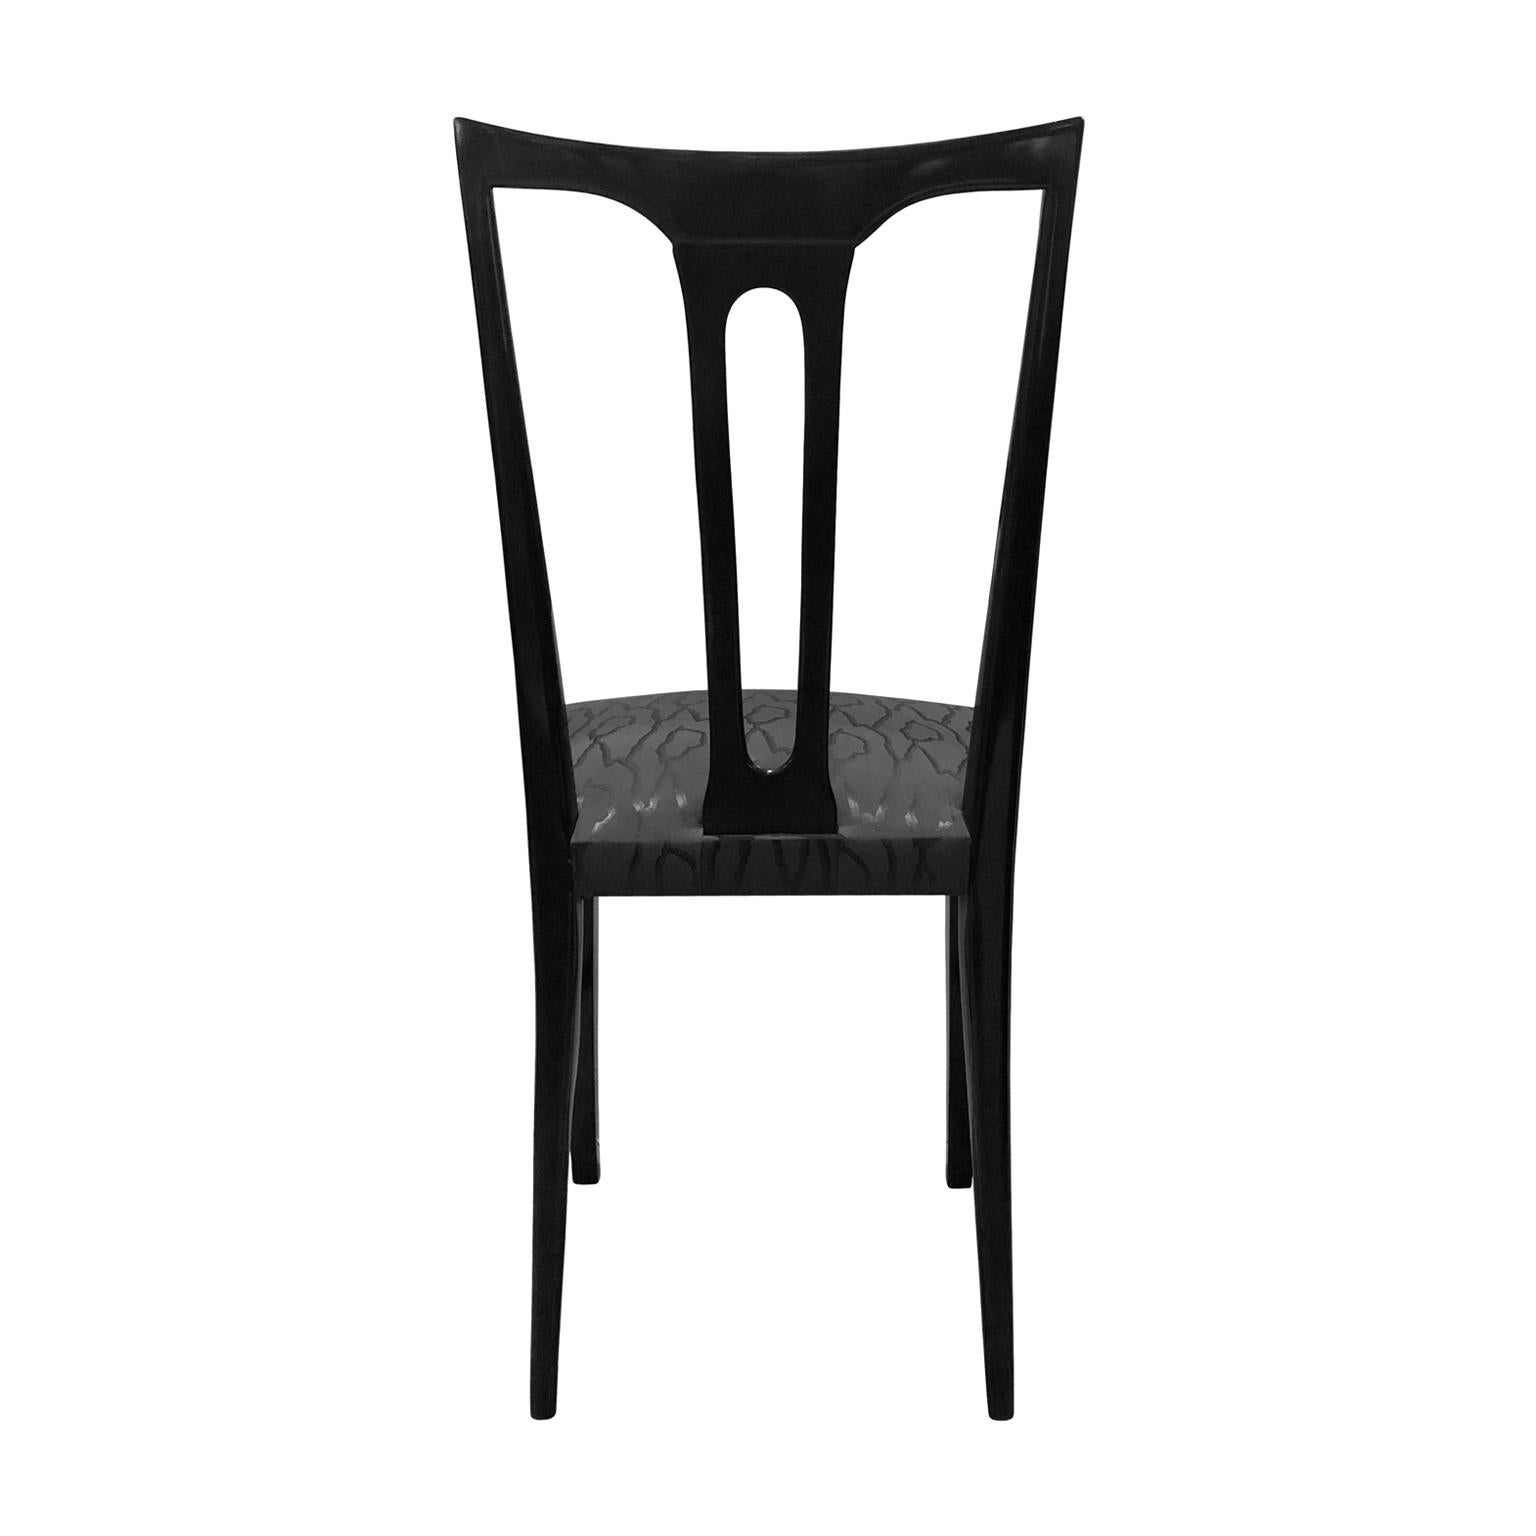 Midcentury Italian Ebonized Occasional Chair in Black Patterned Satin In Excellent Condition For Sale In New York, NY